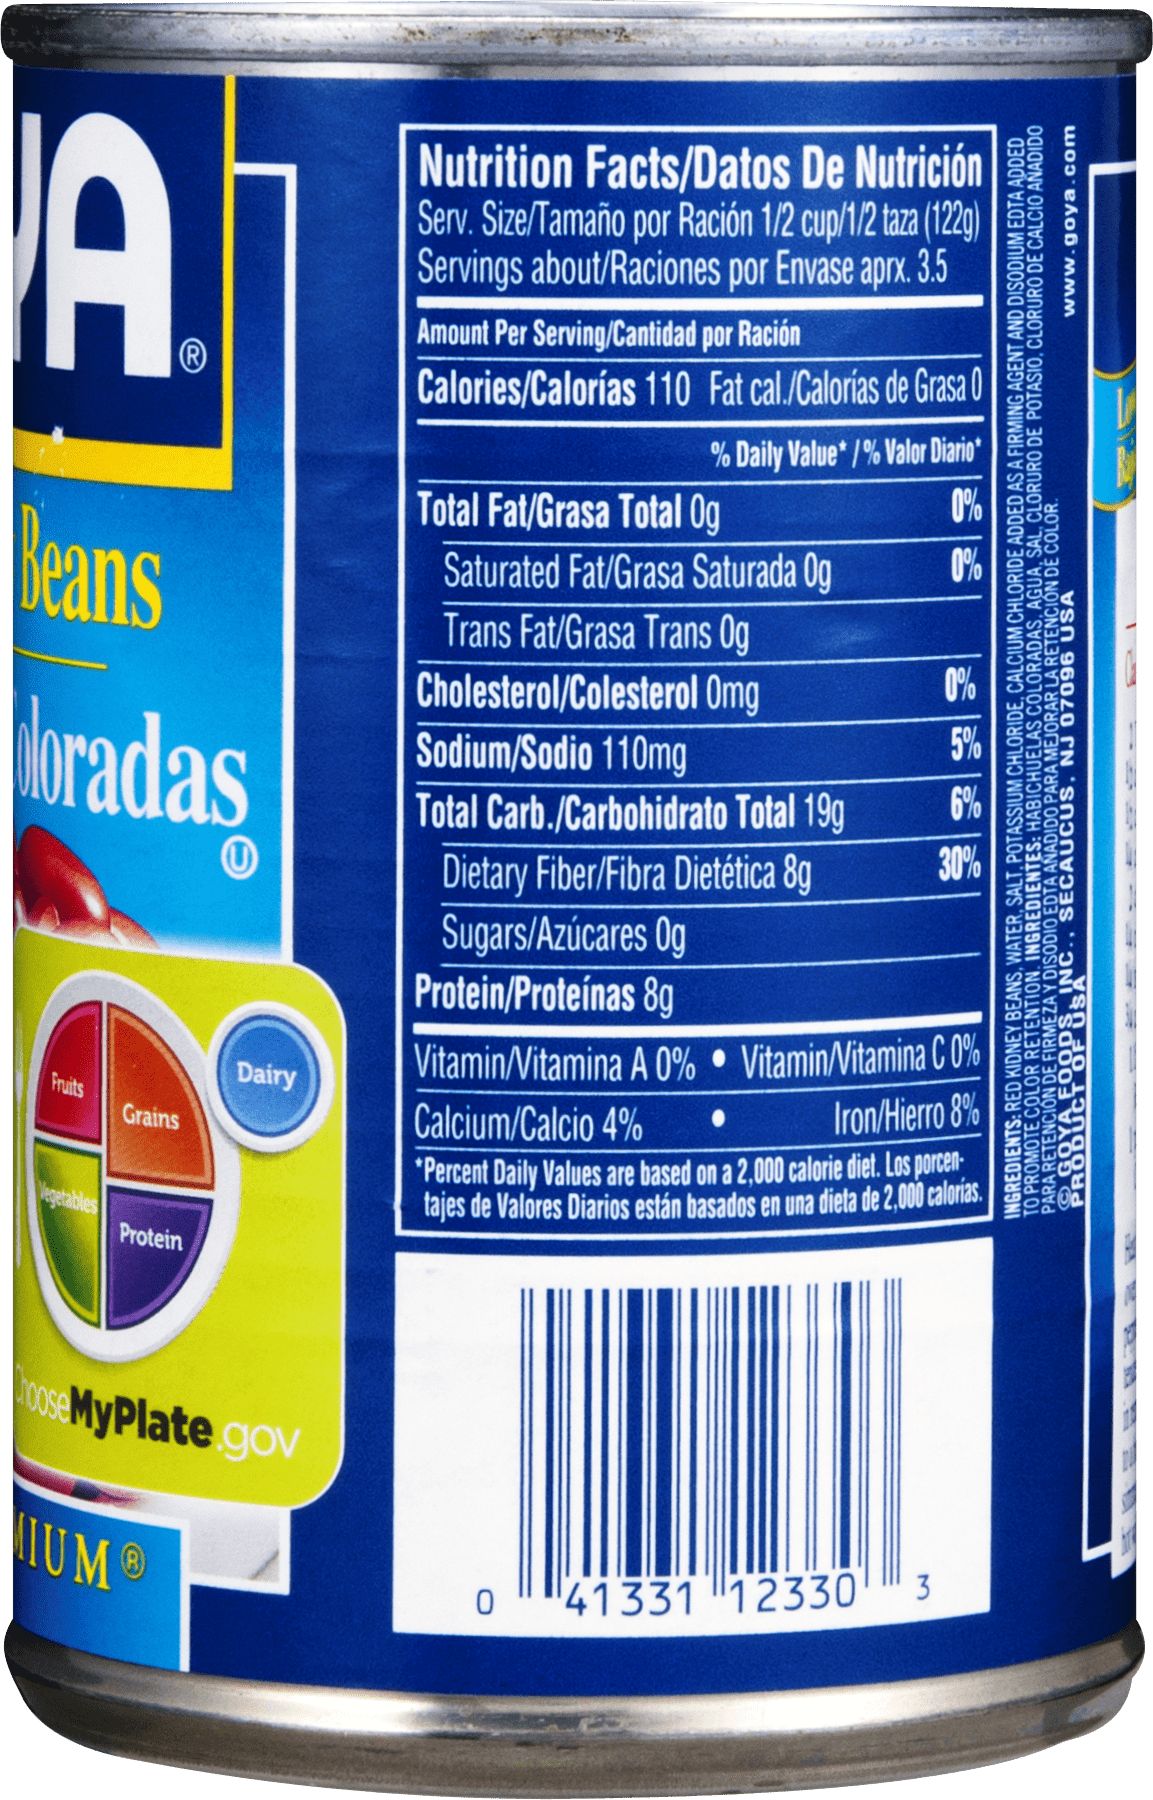 Goya Red Kidney Beans Nutrition Facts – Runners High Nutrition